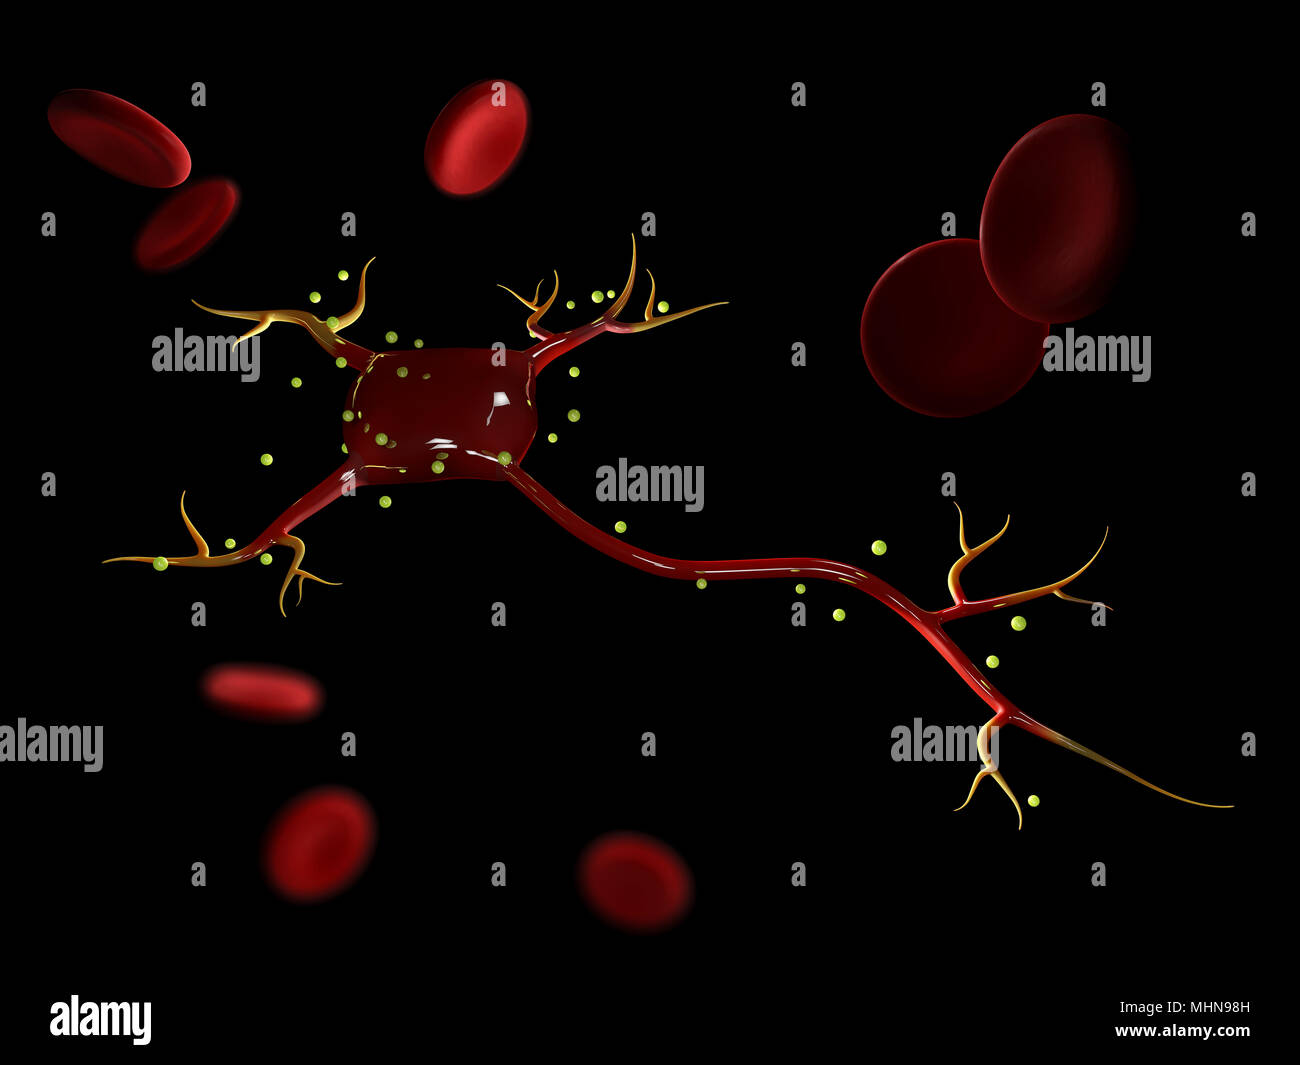 3d illustration of neuron cells with blood cells, high resolution 3D illustration Stock Photo